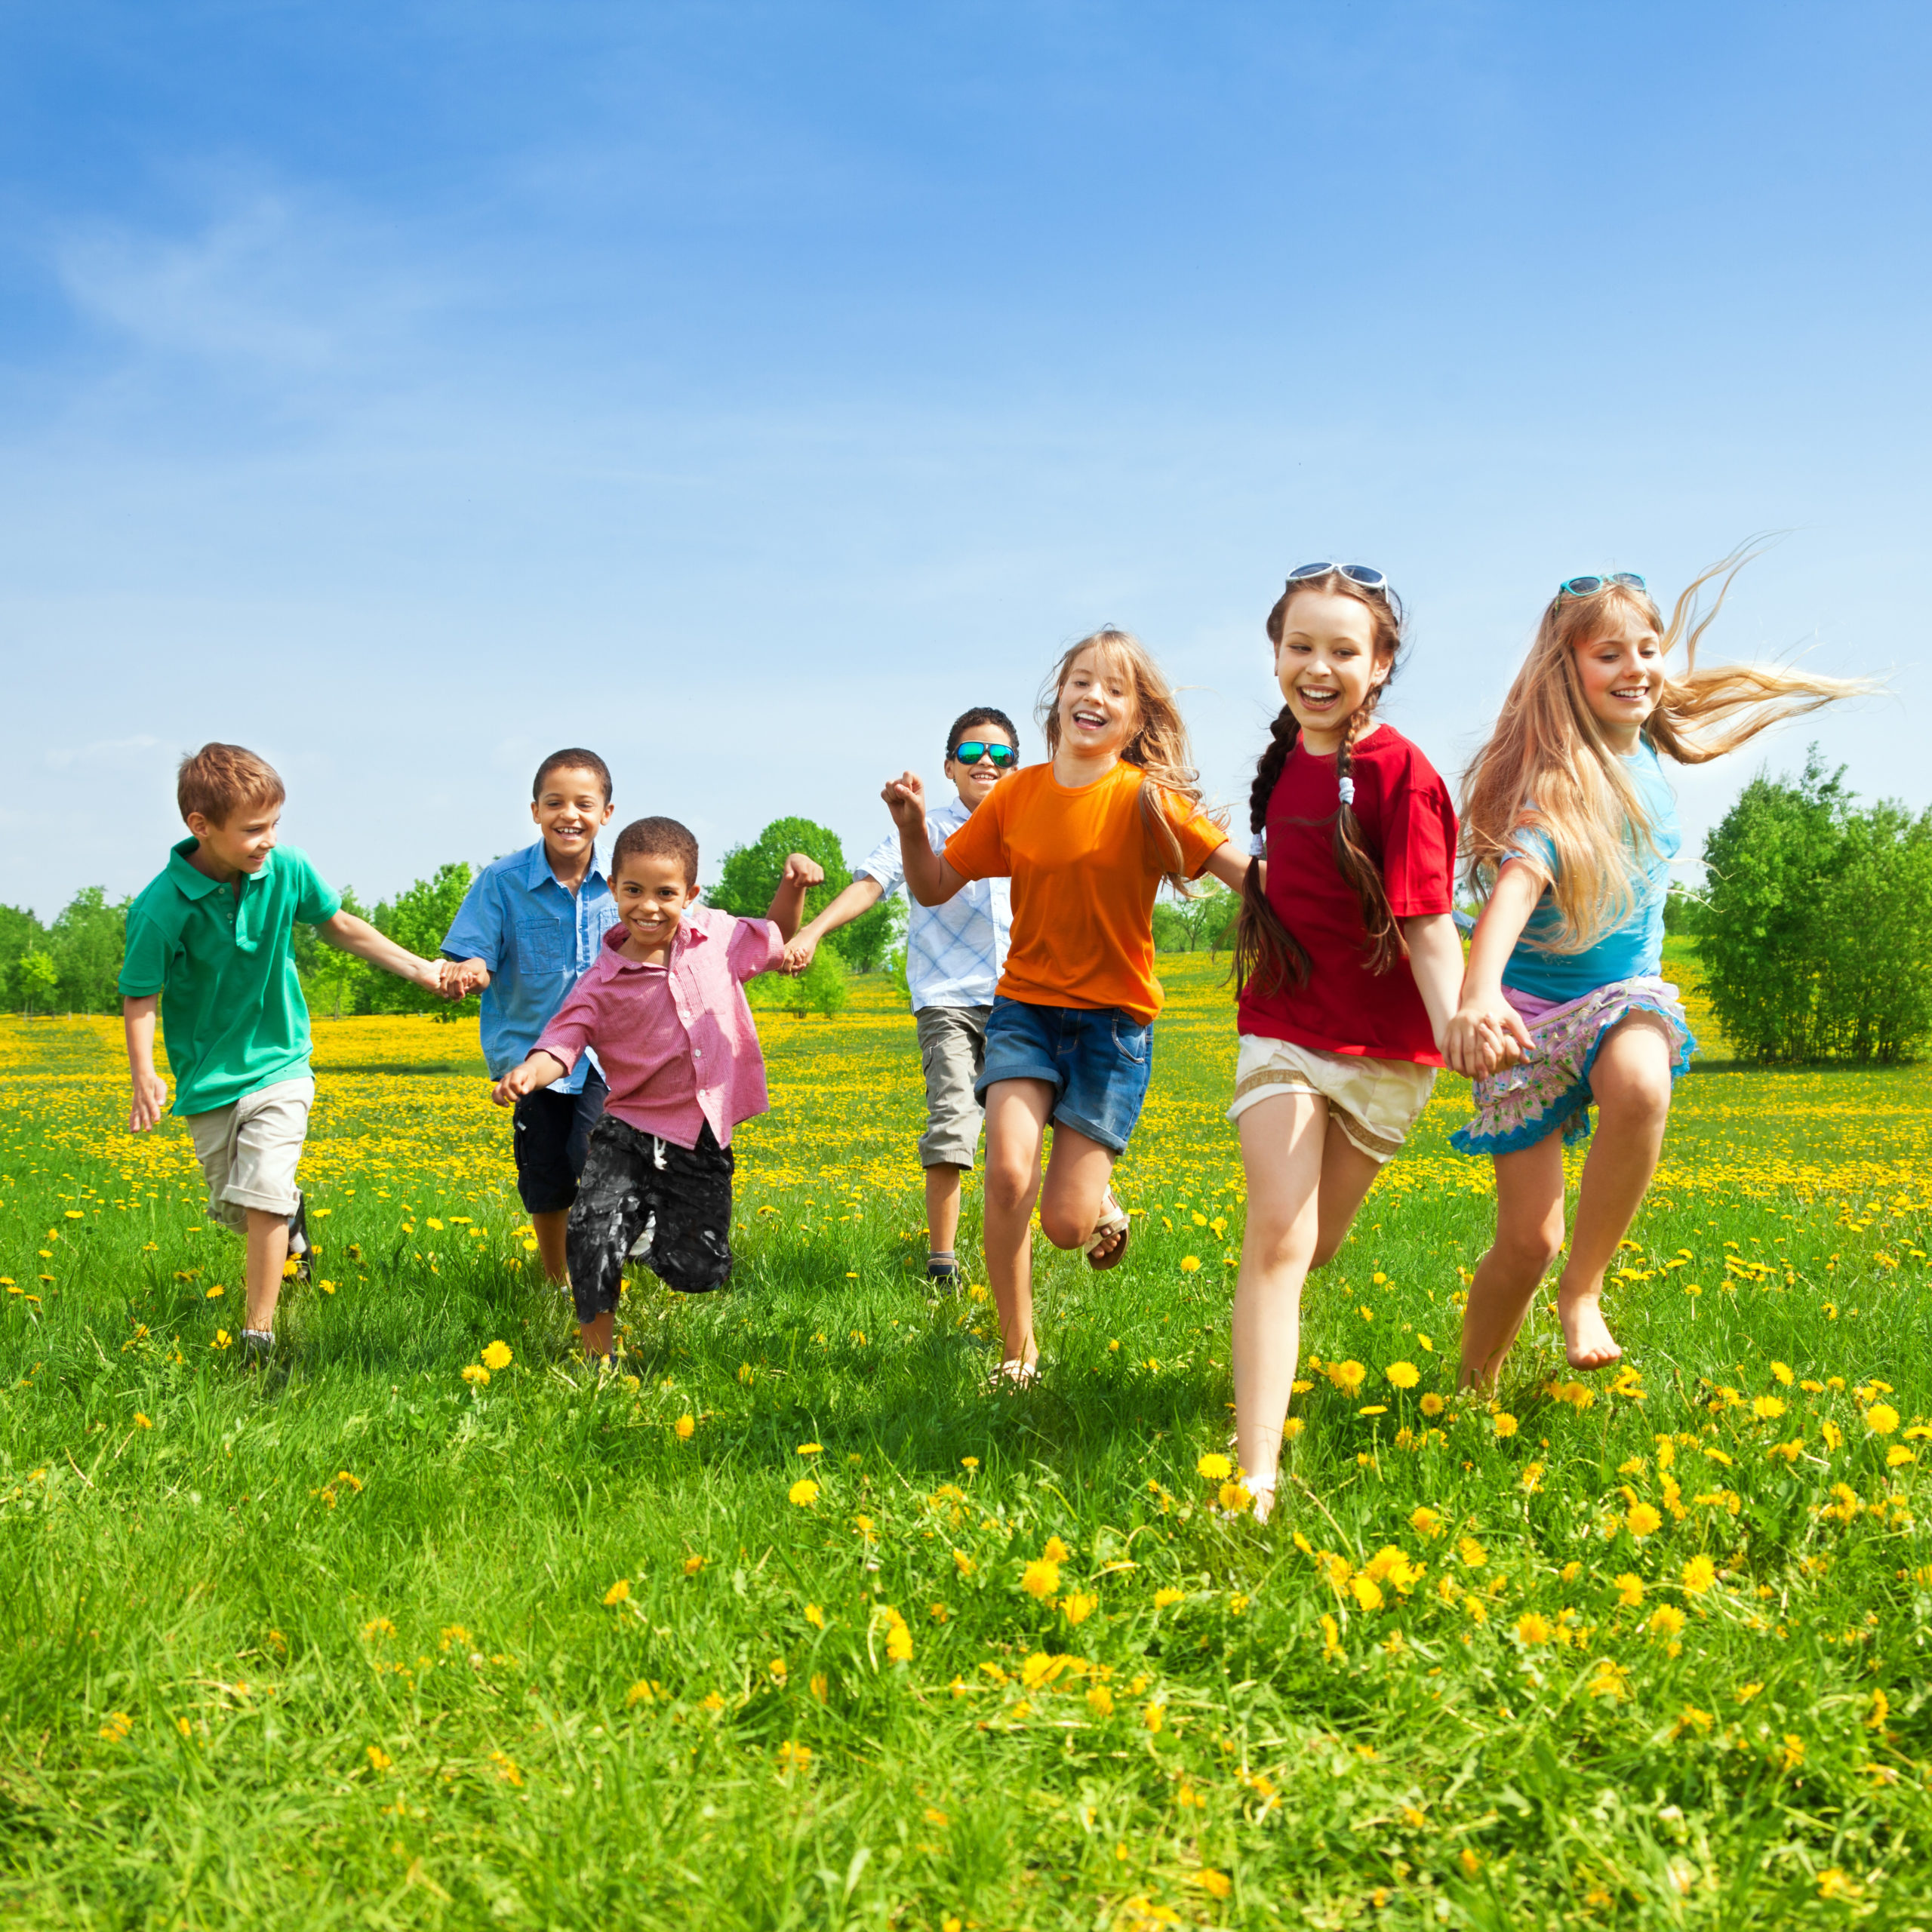 Group of children running and playing during summer time.